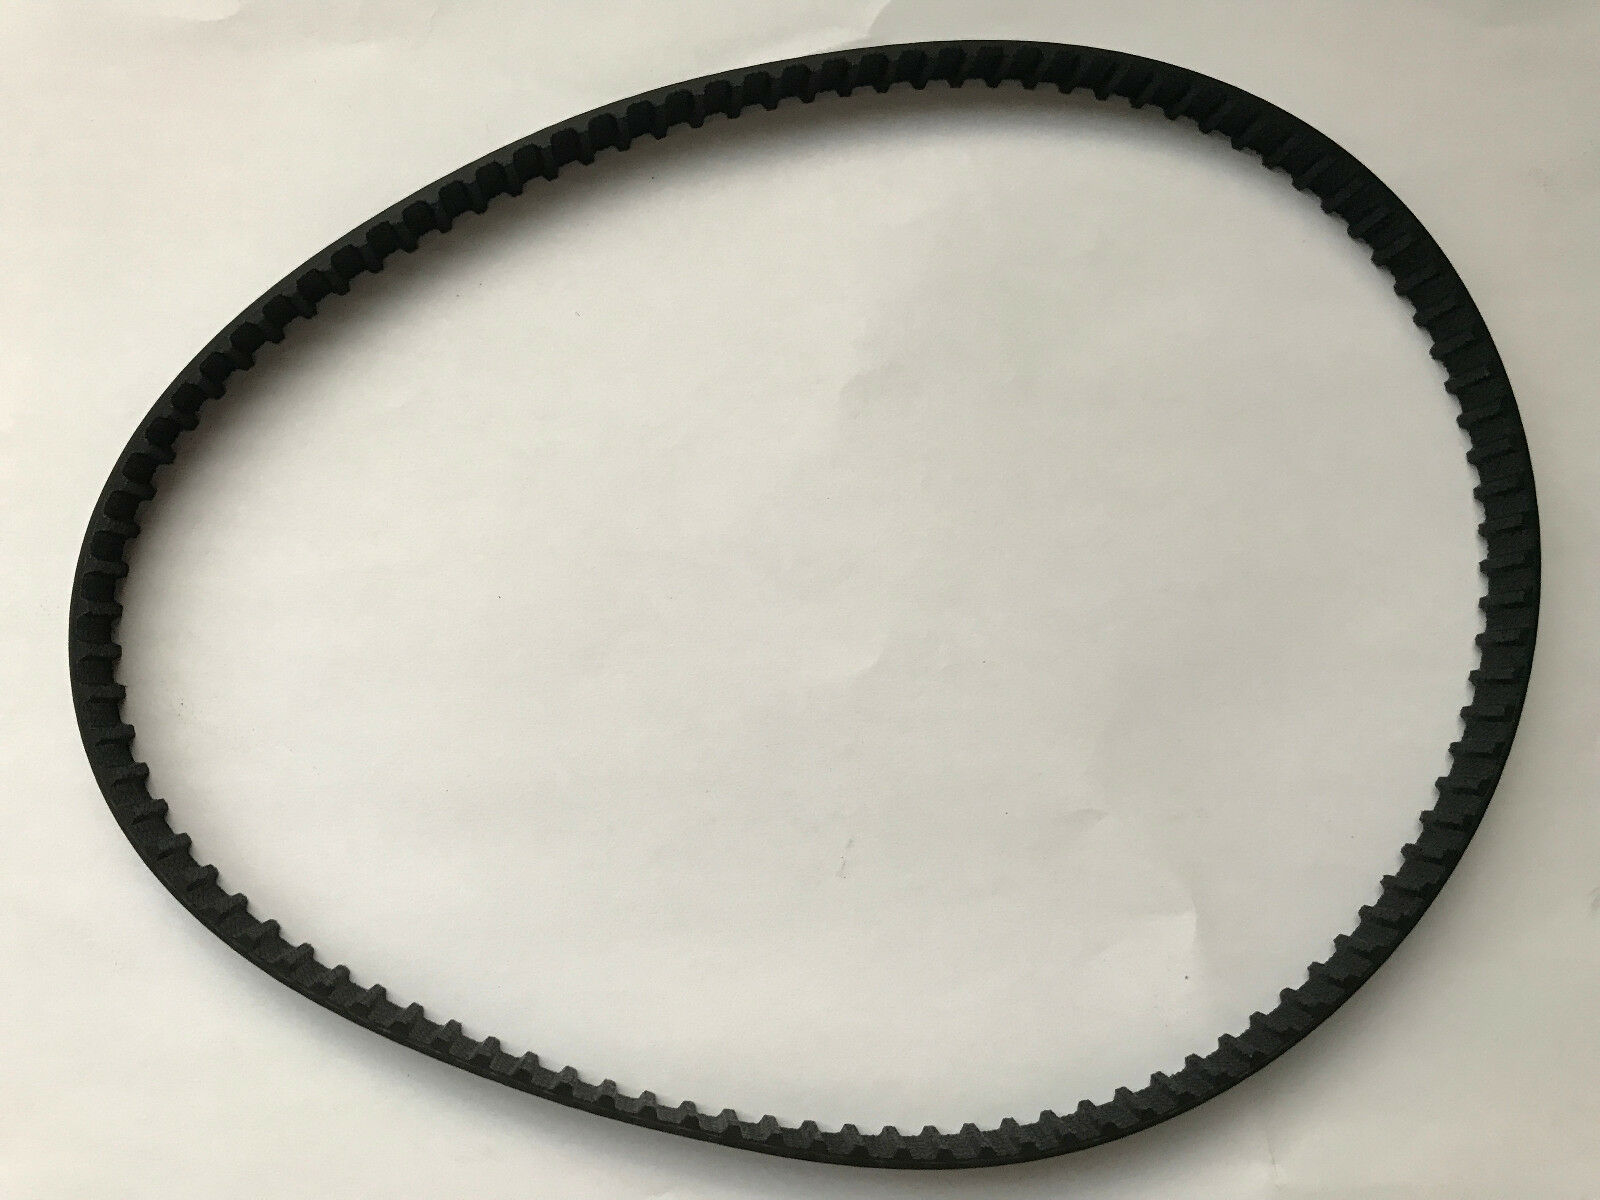 *New Replacement BELT* for use with Savoureux Pro Line model 8808 MEAT SLICER